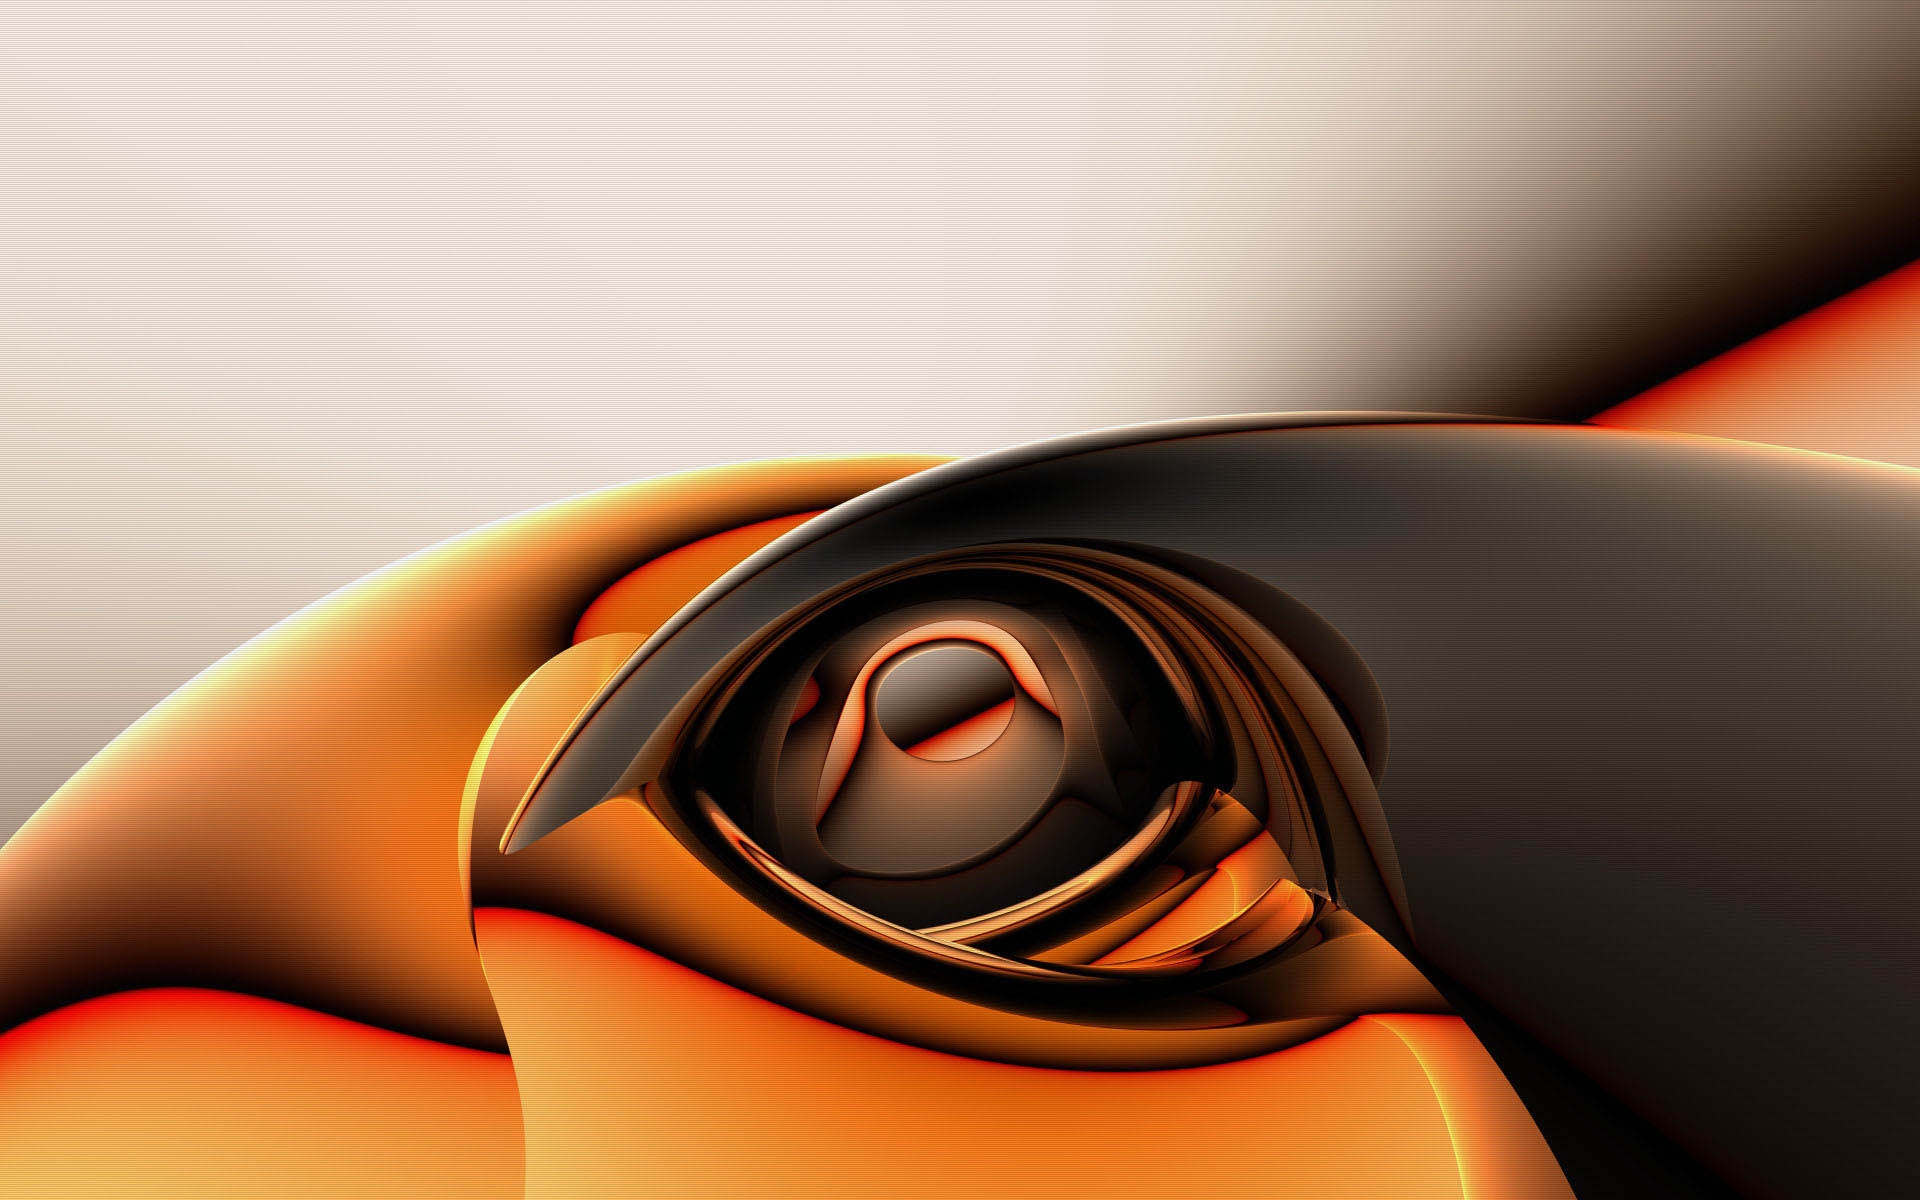 Abstract Creation In Orange And Black Wallpaper